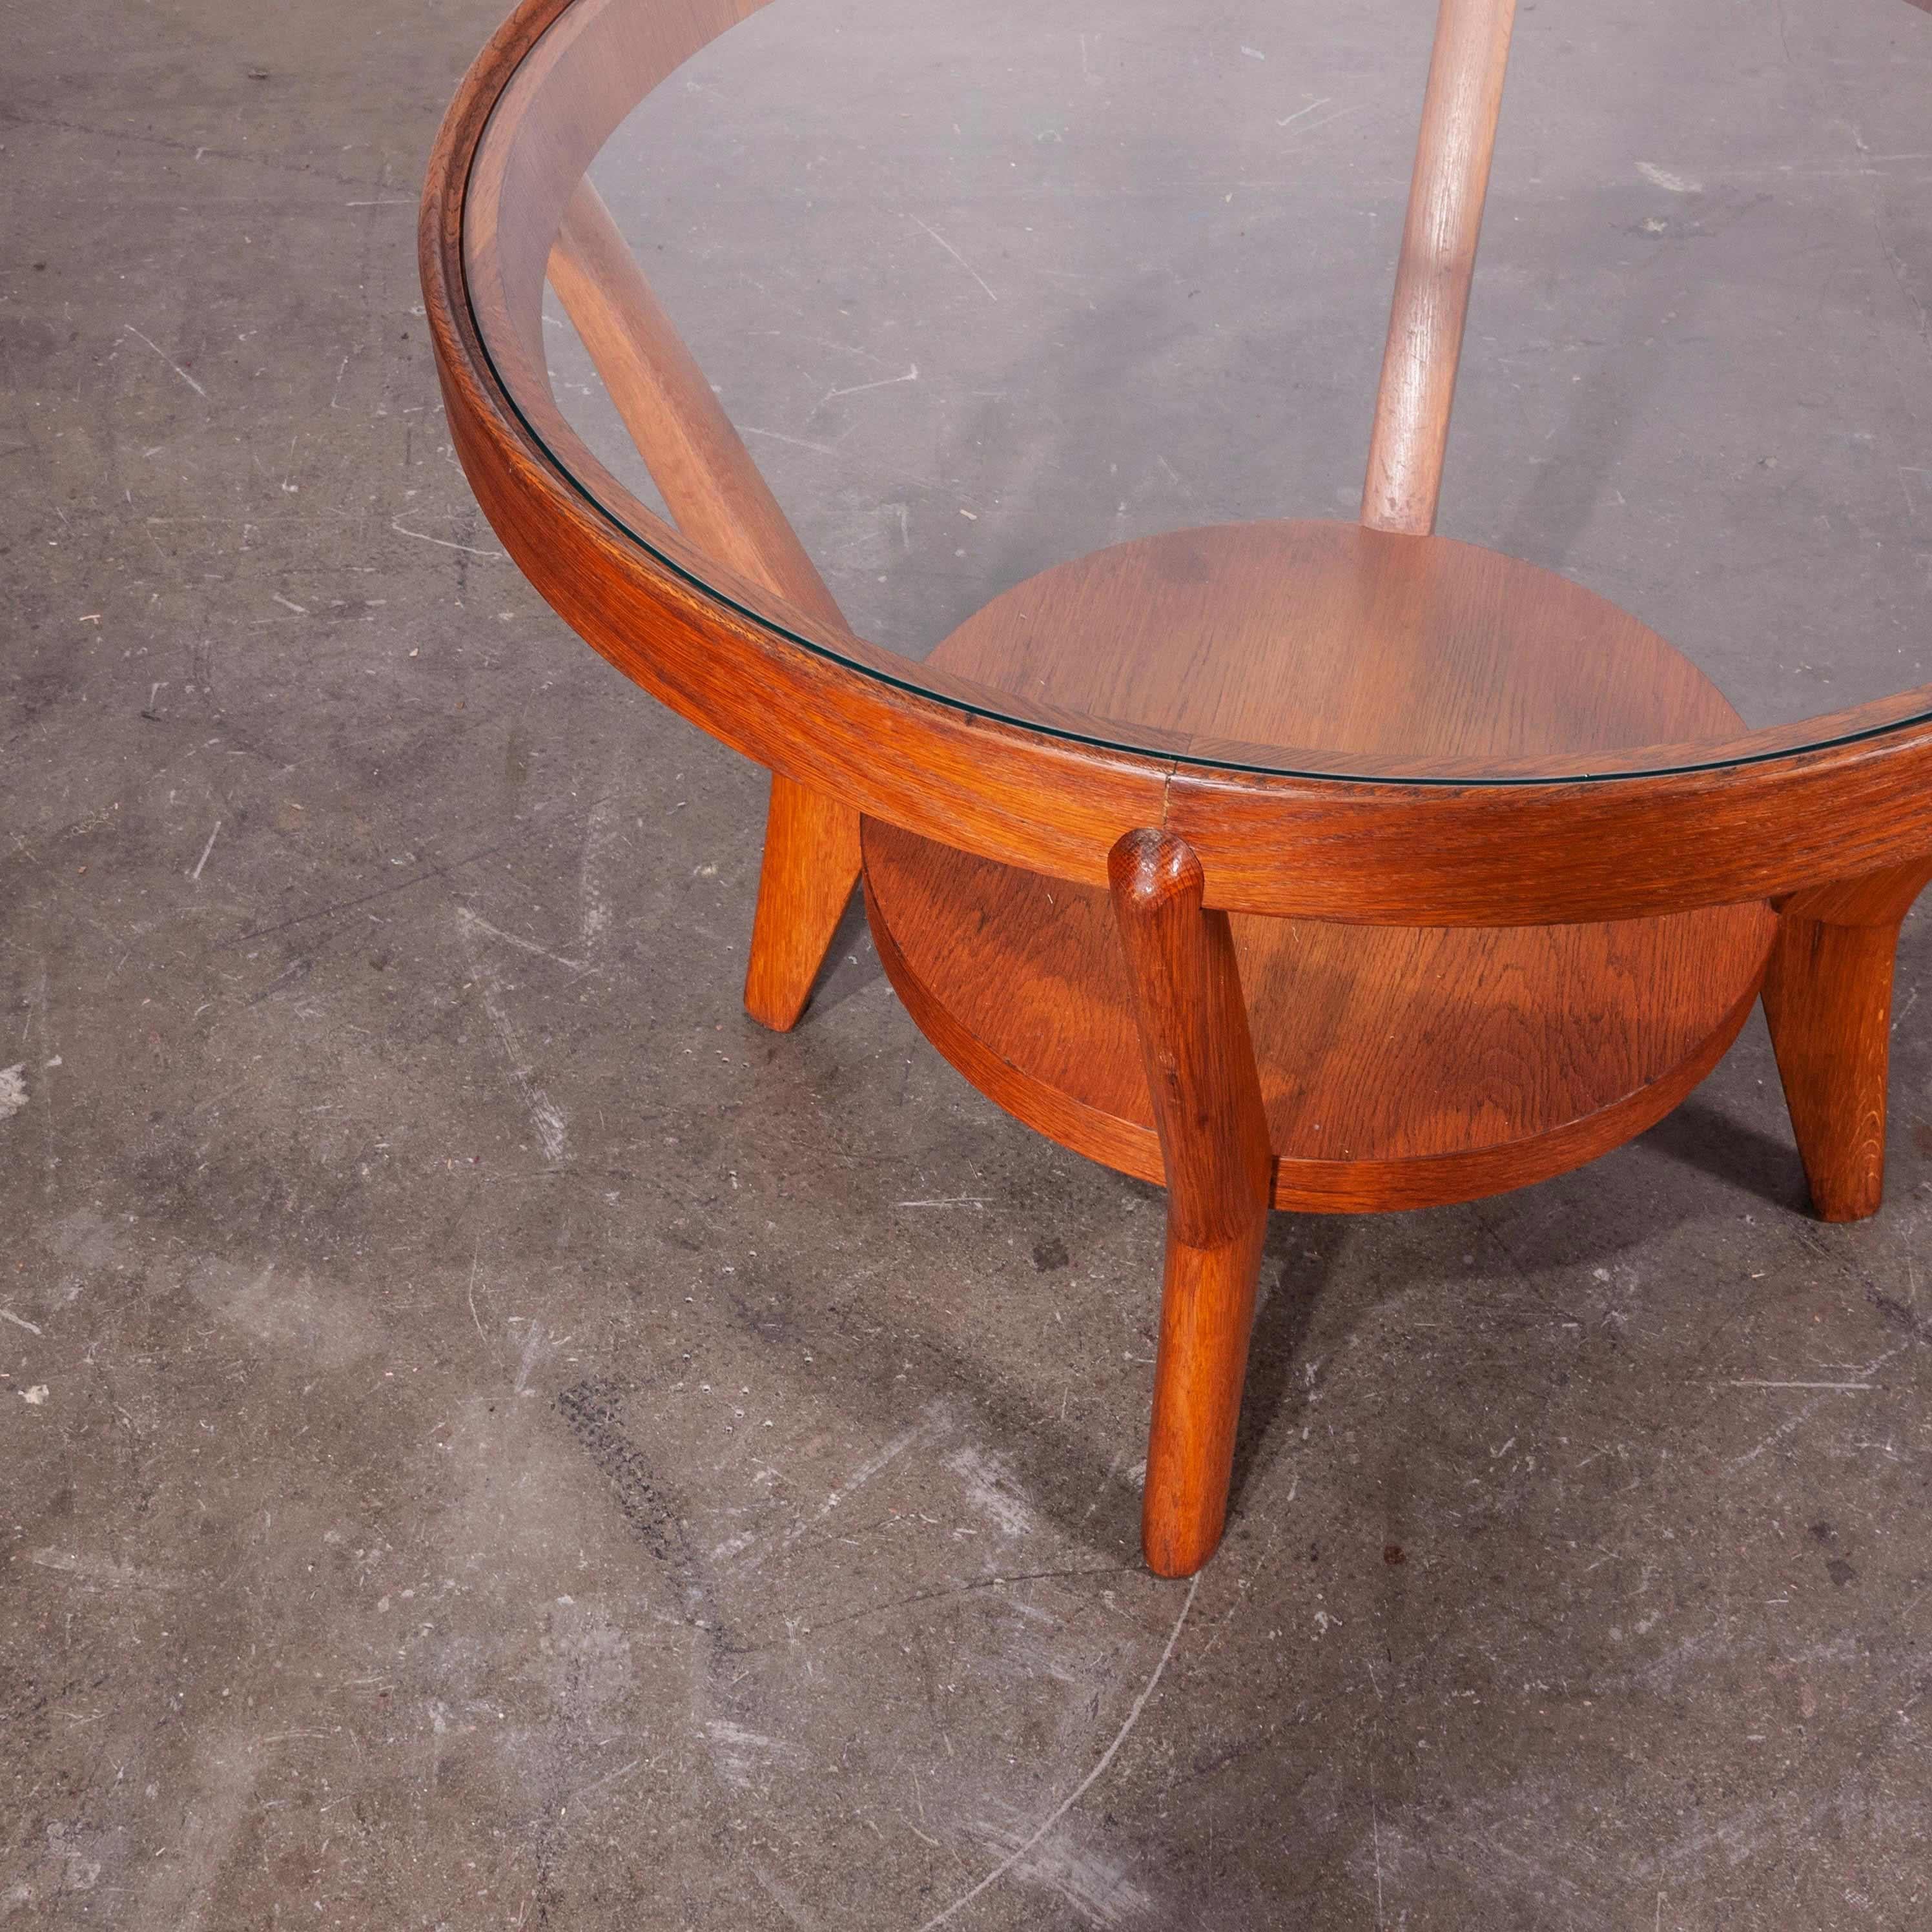 Mid-20th Century 1950s Round Occasional Table by Kozelka and Kropacek for Interieur Praha, Ligh